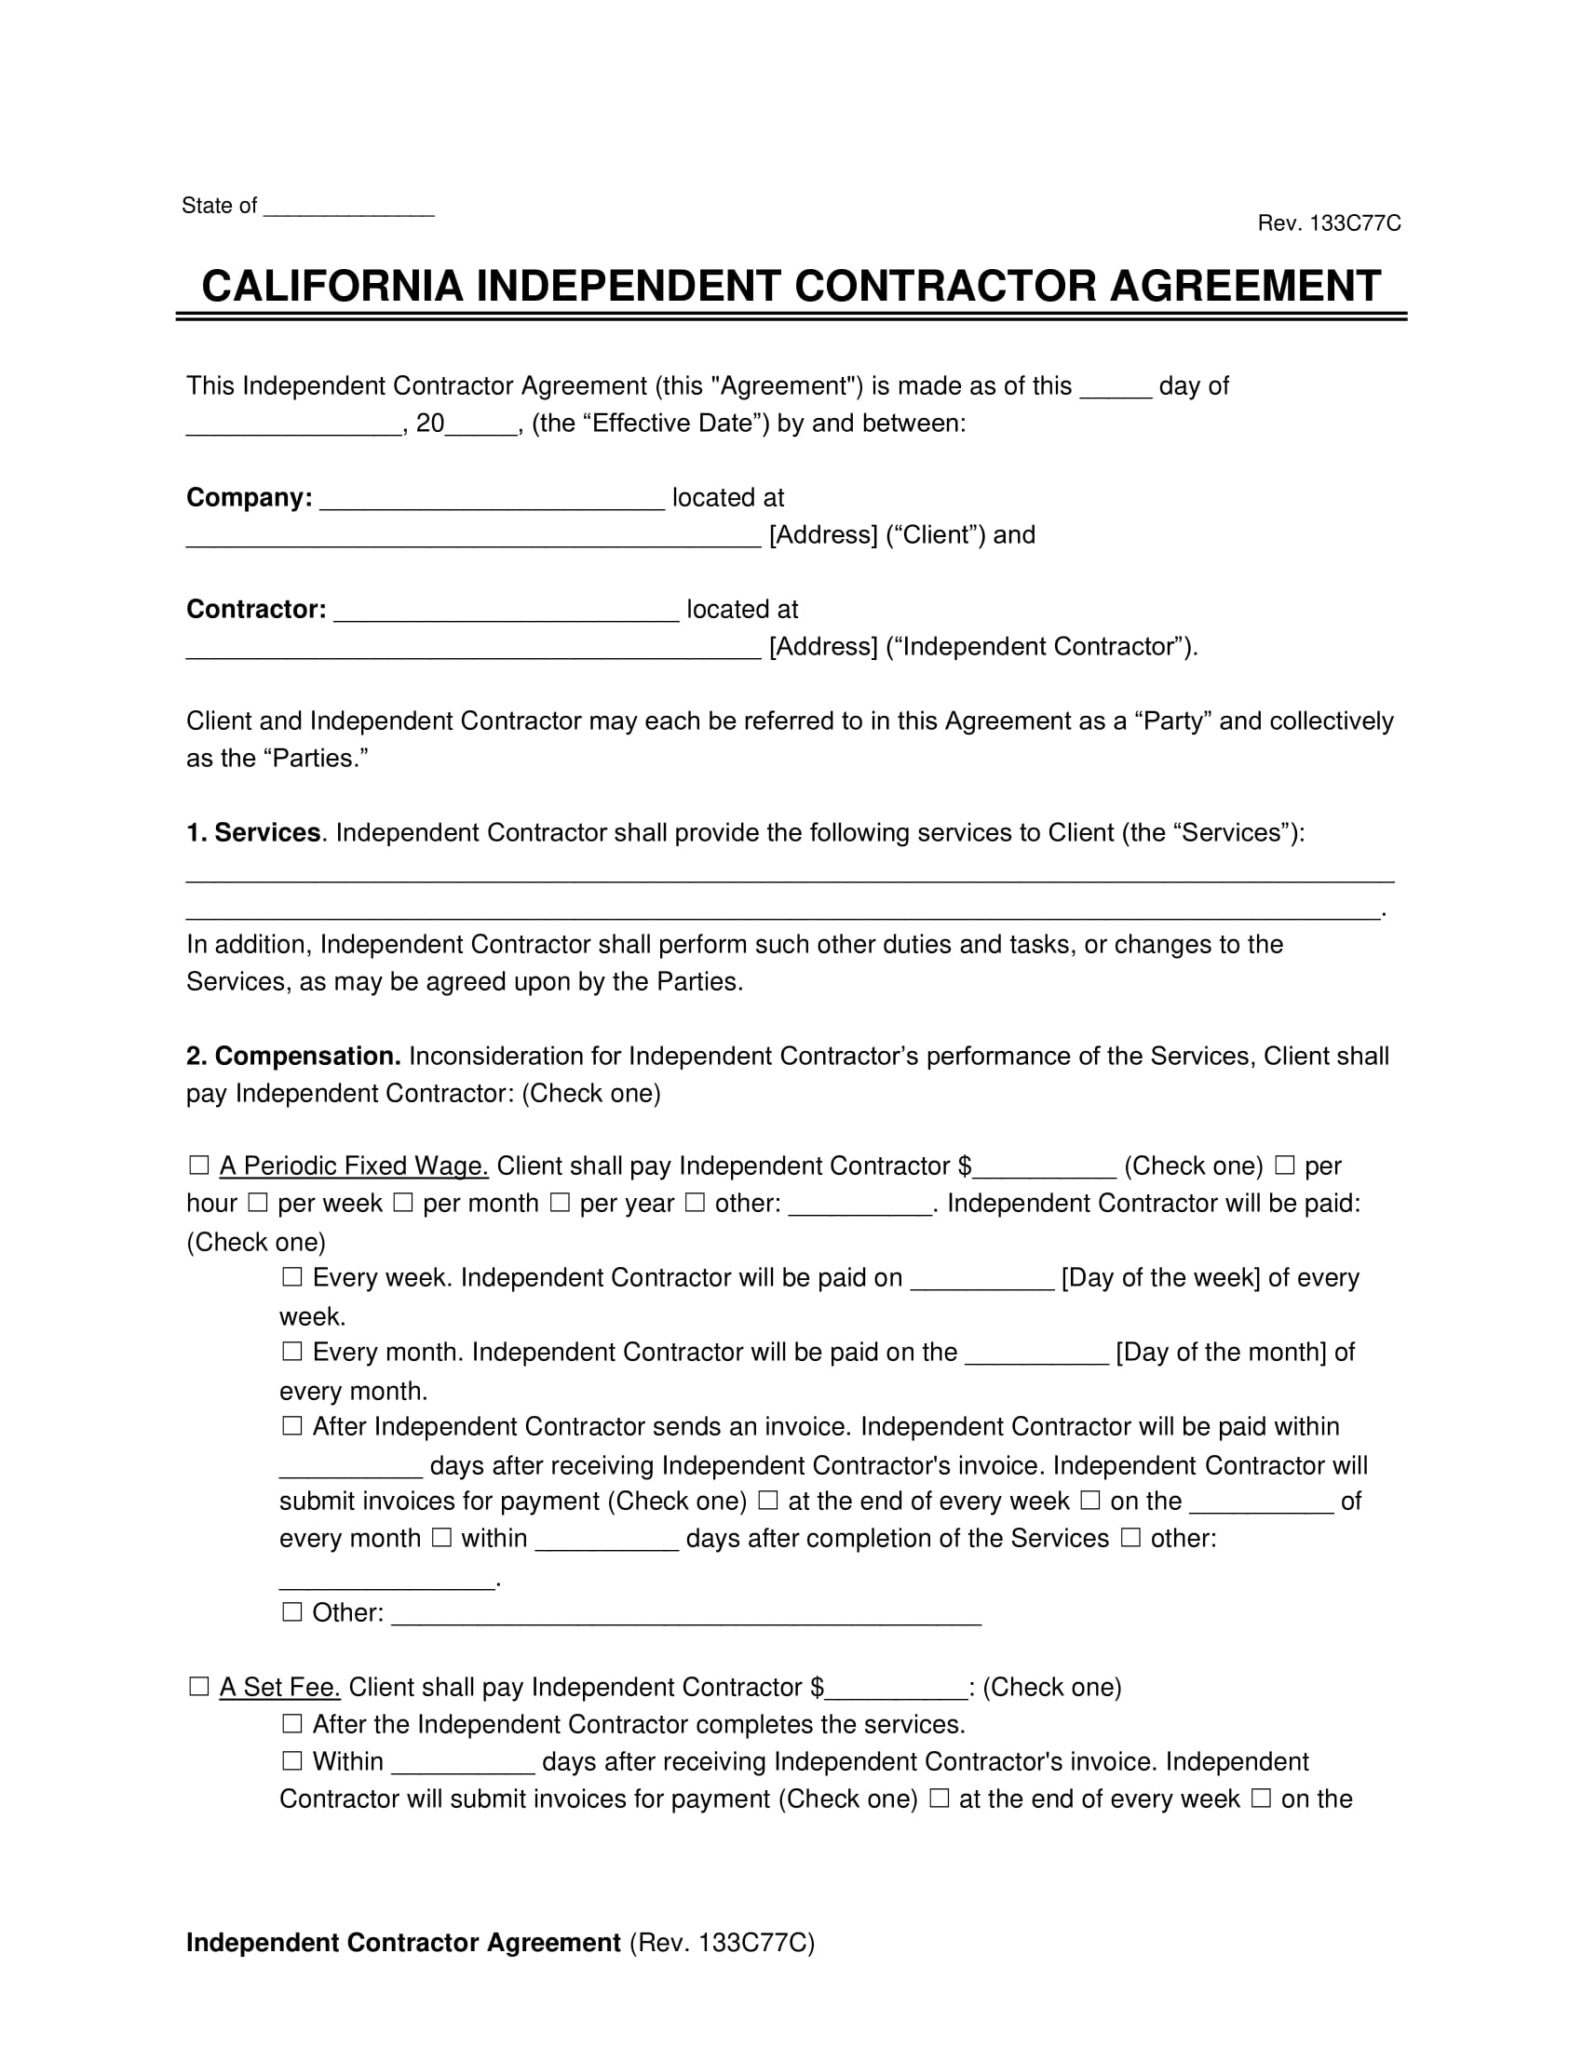 California Independent Contractor Agreement 1 Min 1583x2048 